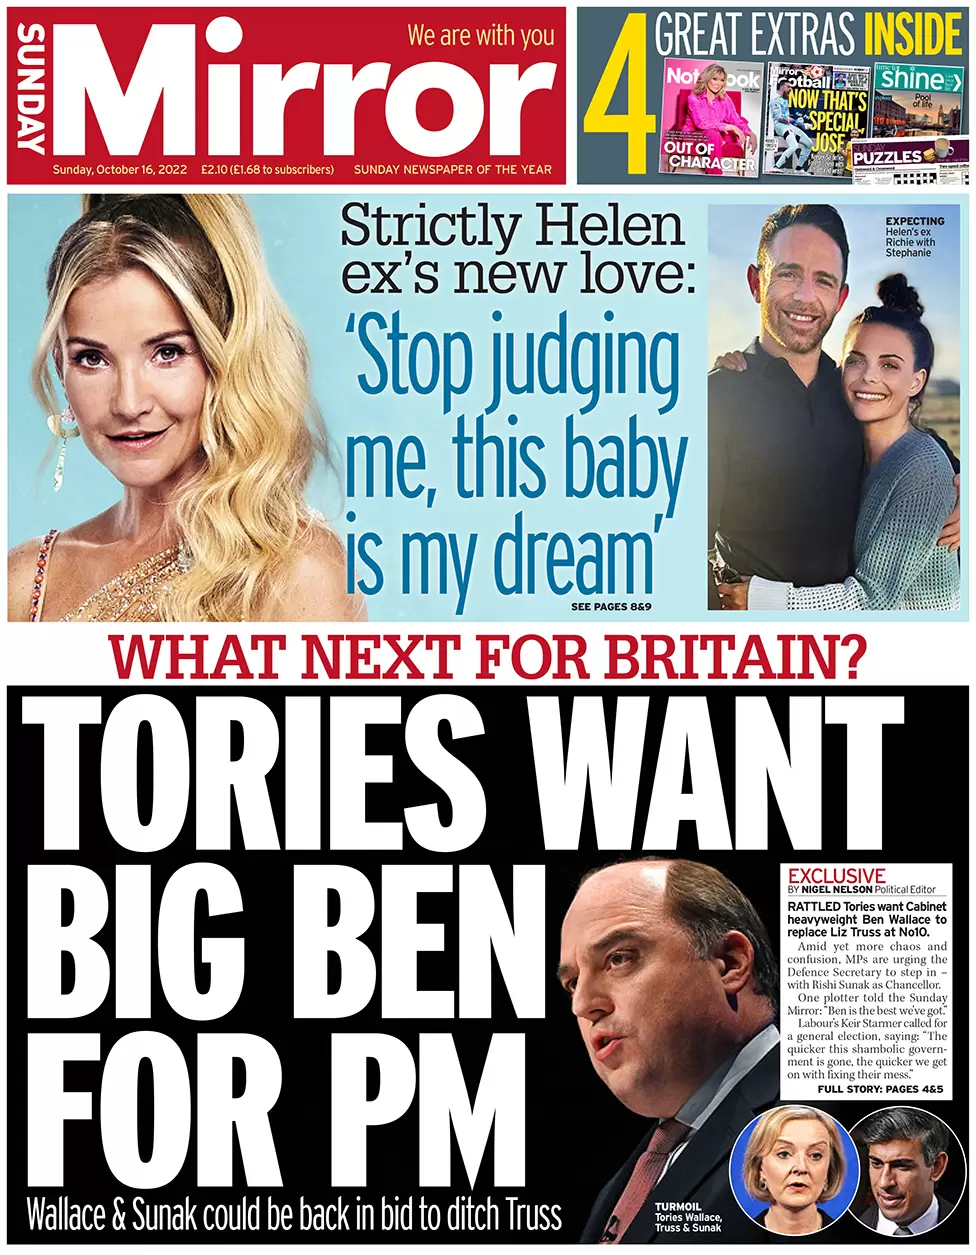 Sunday Mirror - Tories want Big Ben for PM